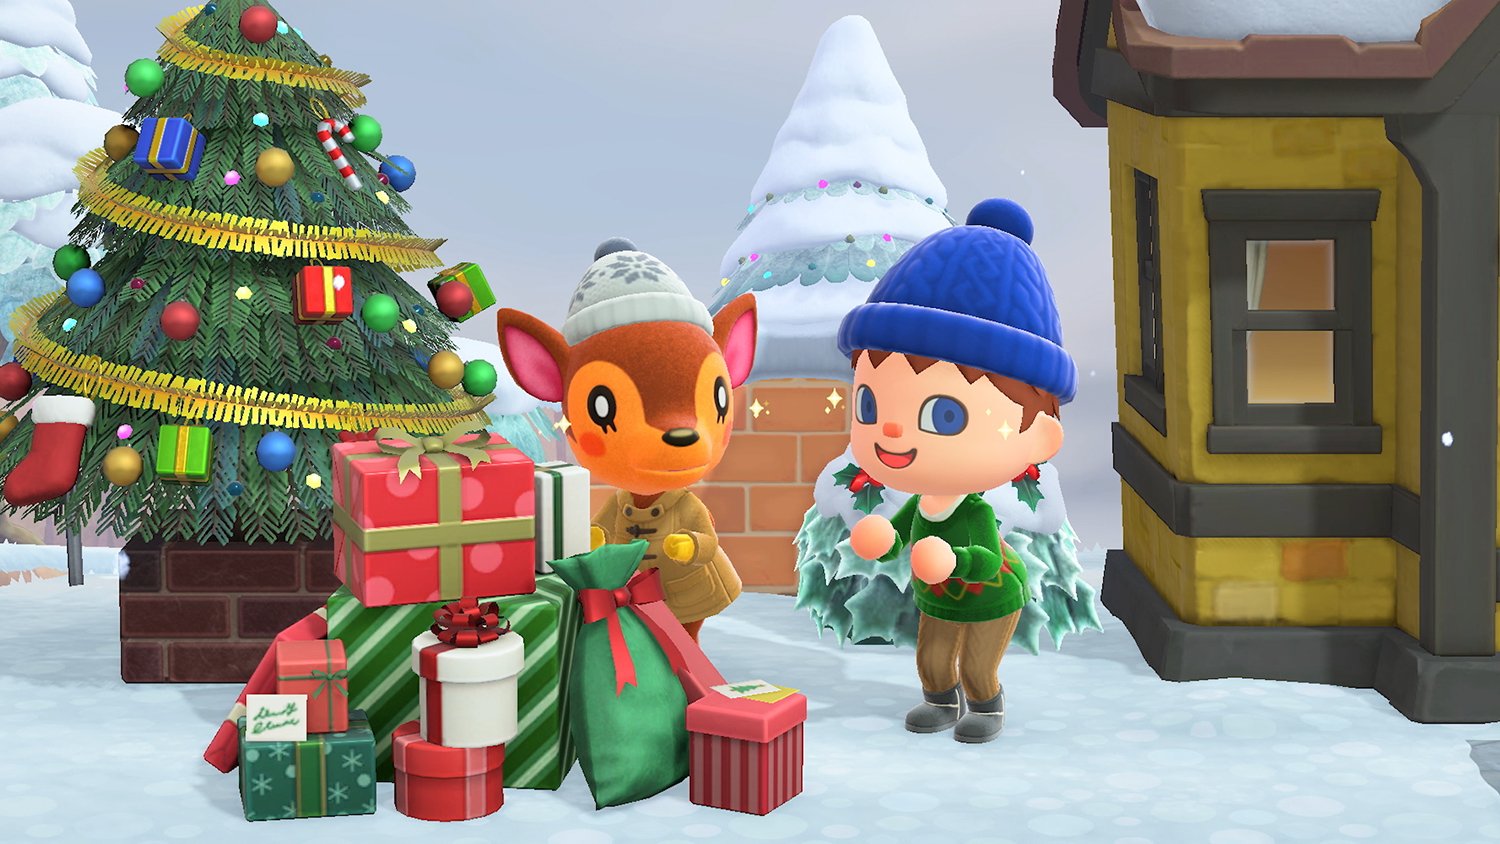 A villager stands by a pile of presents with Fauna in December in Animal Crossing: New Horizons